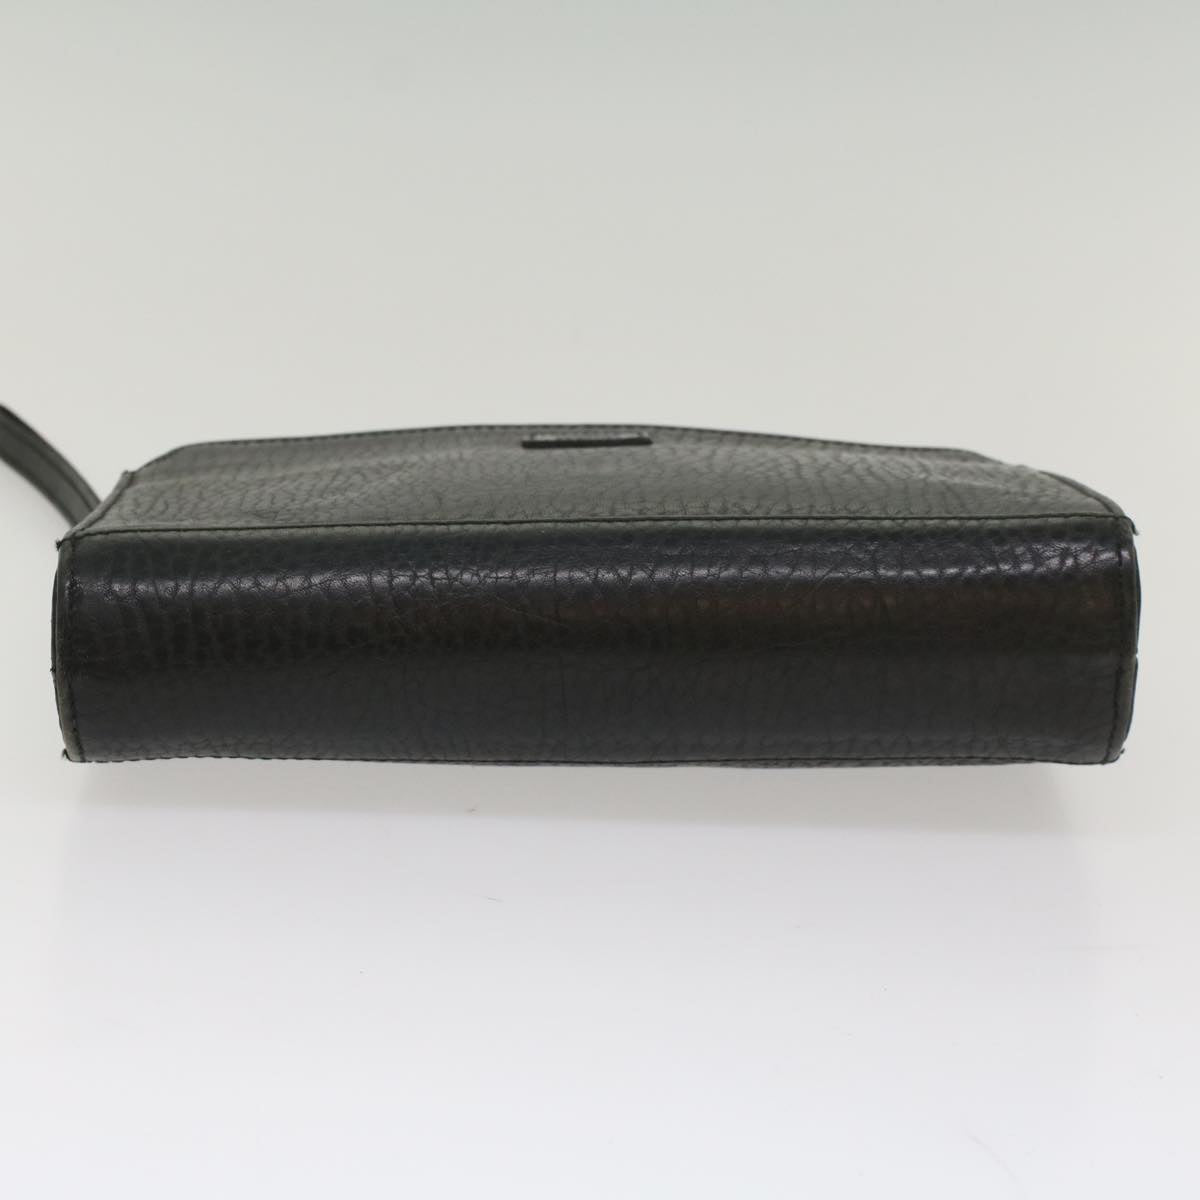 Burberrys Clutch Bag Leather Black Auth bs8538